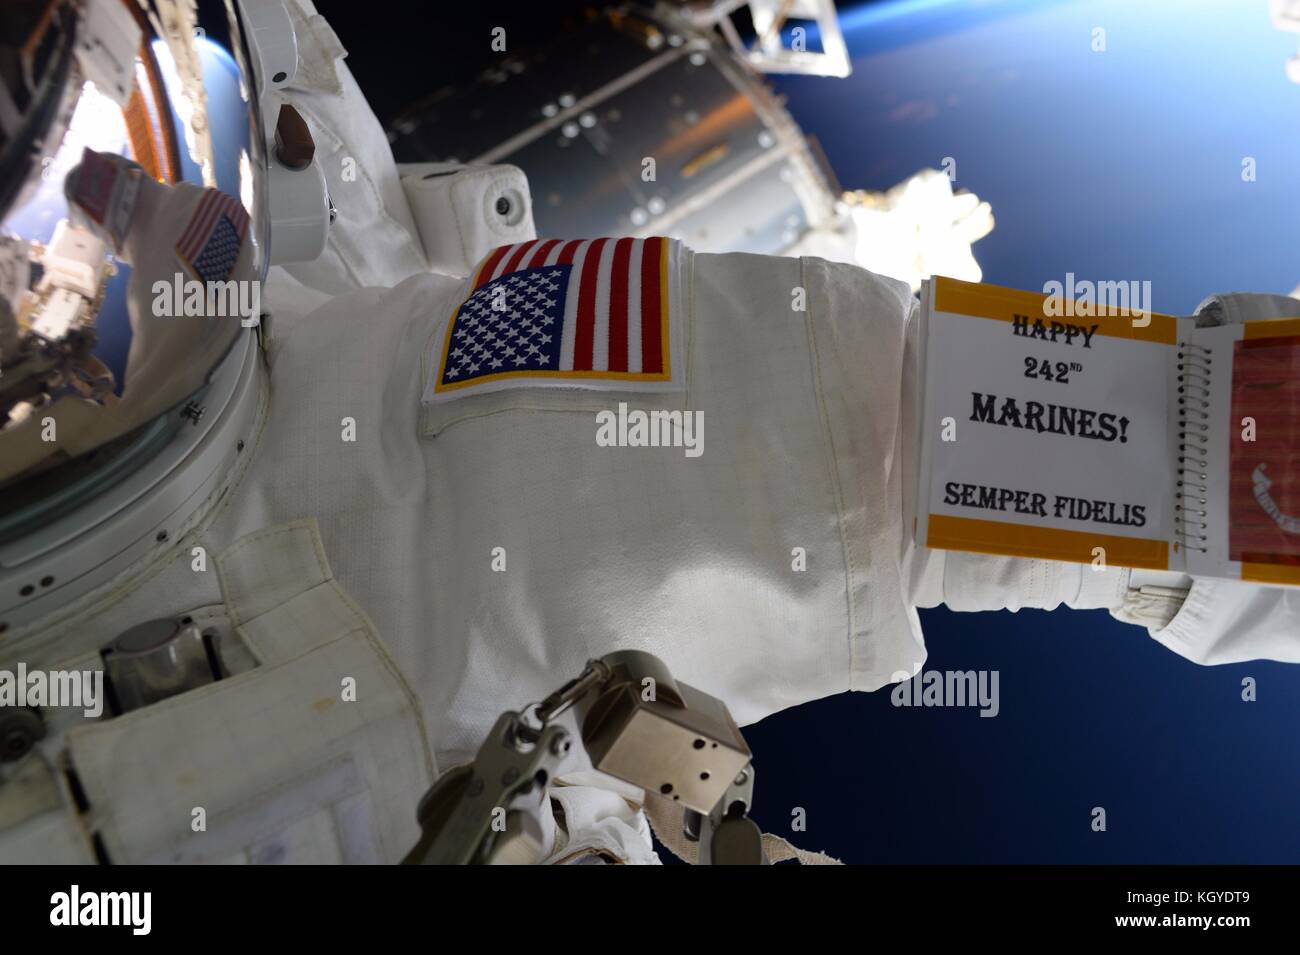 International Space Station. 10th Nov, 2017. Expedition 53 American astronaut Randy Bresnik celebrates the birthday of the U.S. Marine Corps with a message attached to his spacesuit aboard the International Space Station for storage November 10, 2017 in Earth Orbit. Credit: Planetpix/Alamy Live News Stock Photo